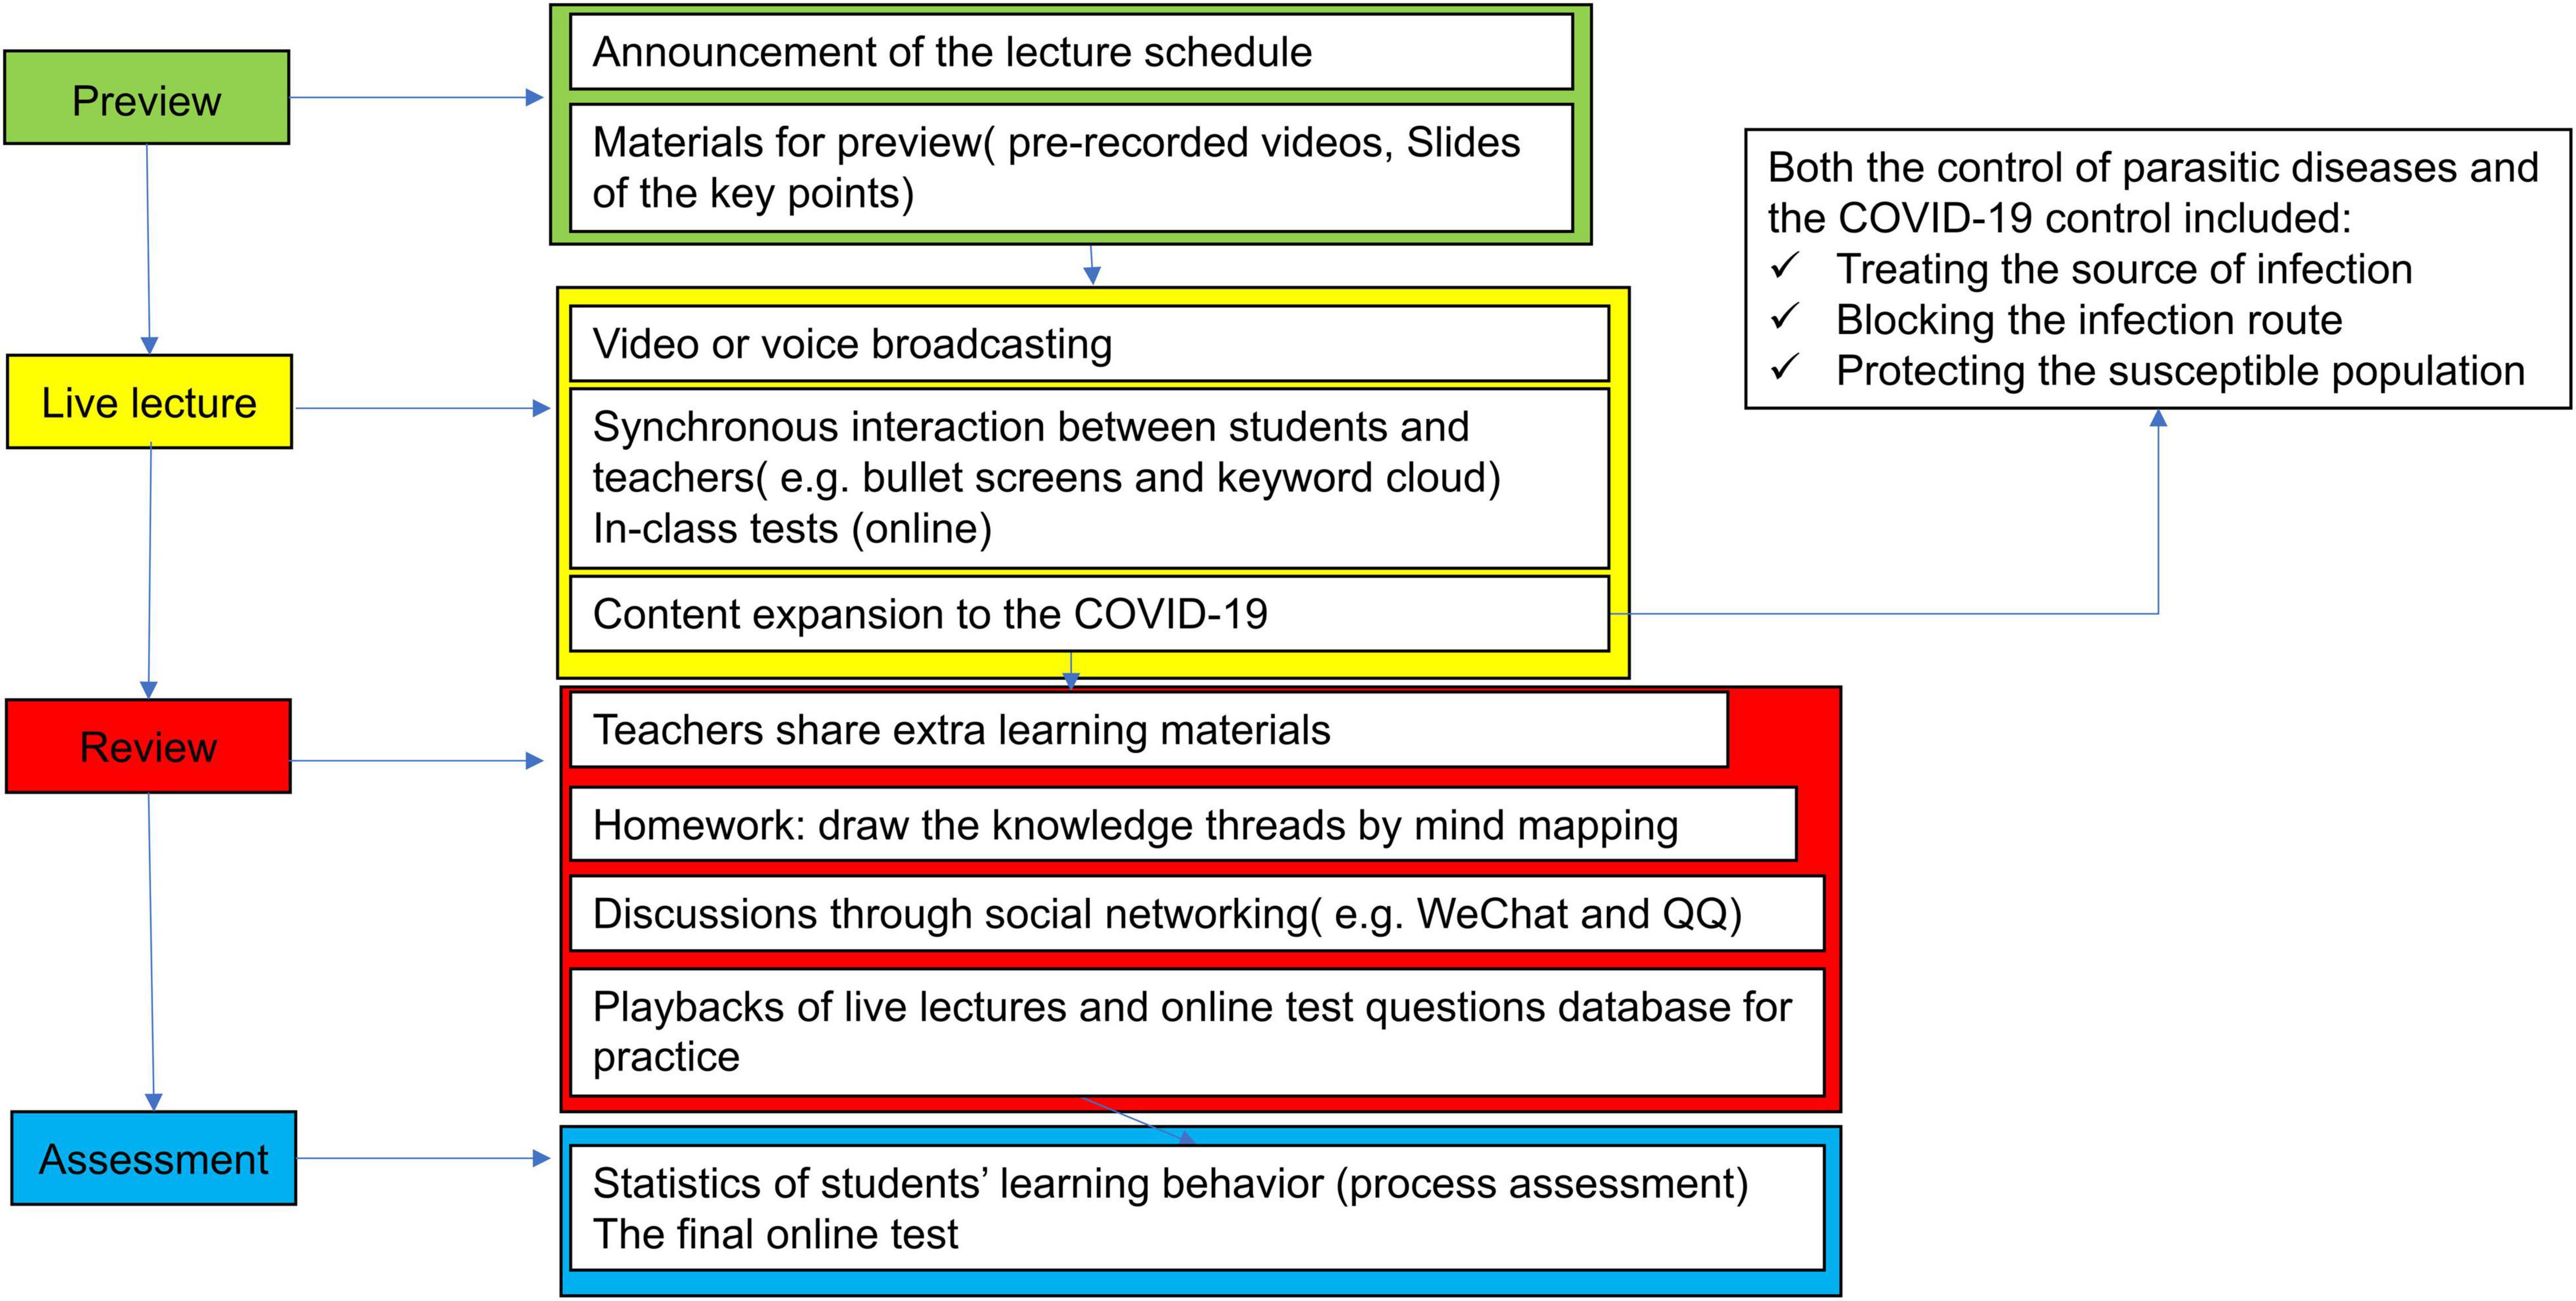 Tools for Remote Teaching During COVID-19 Outbreak - The Keyword